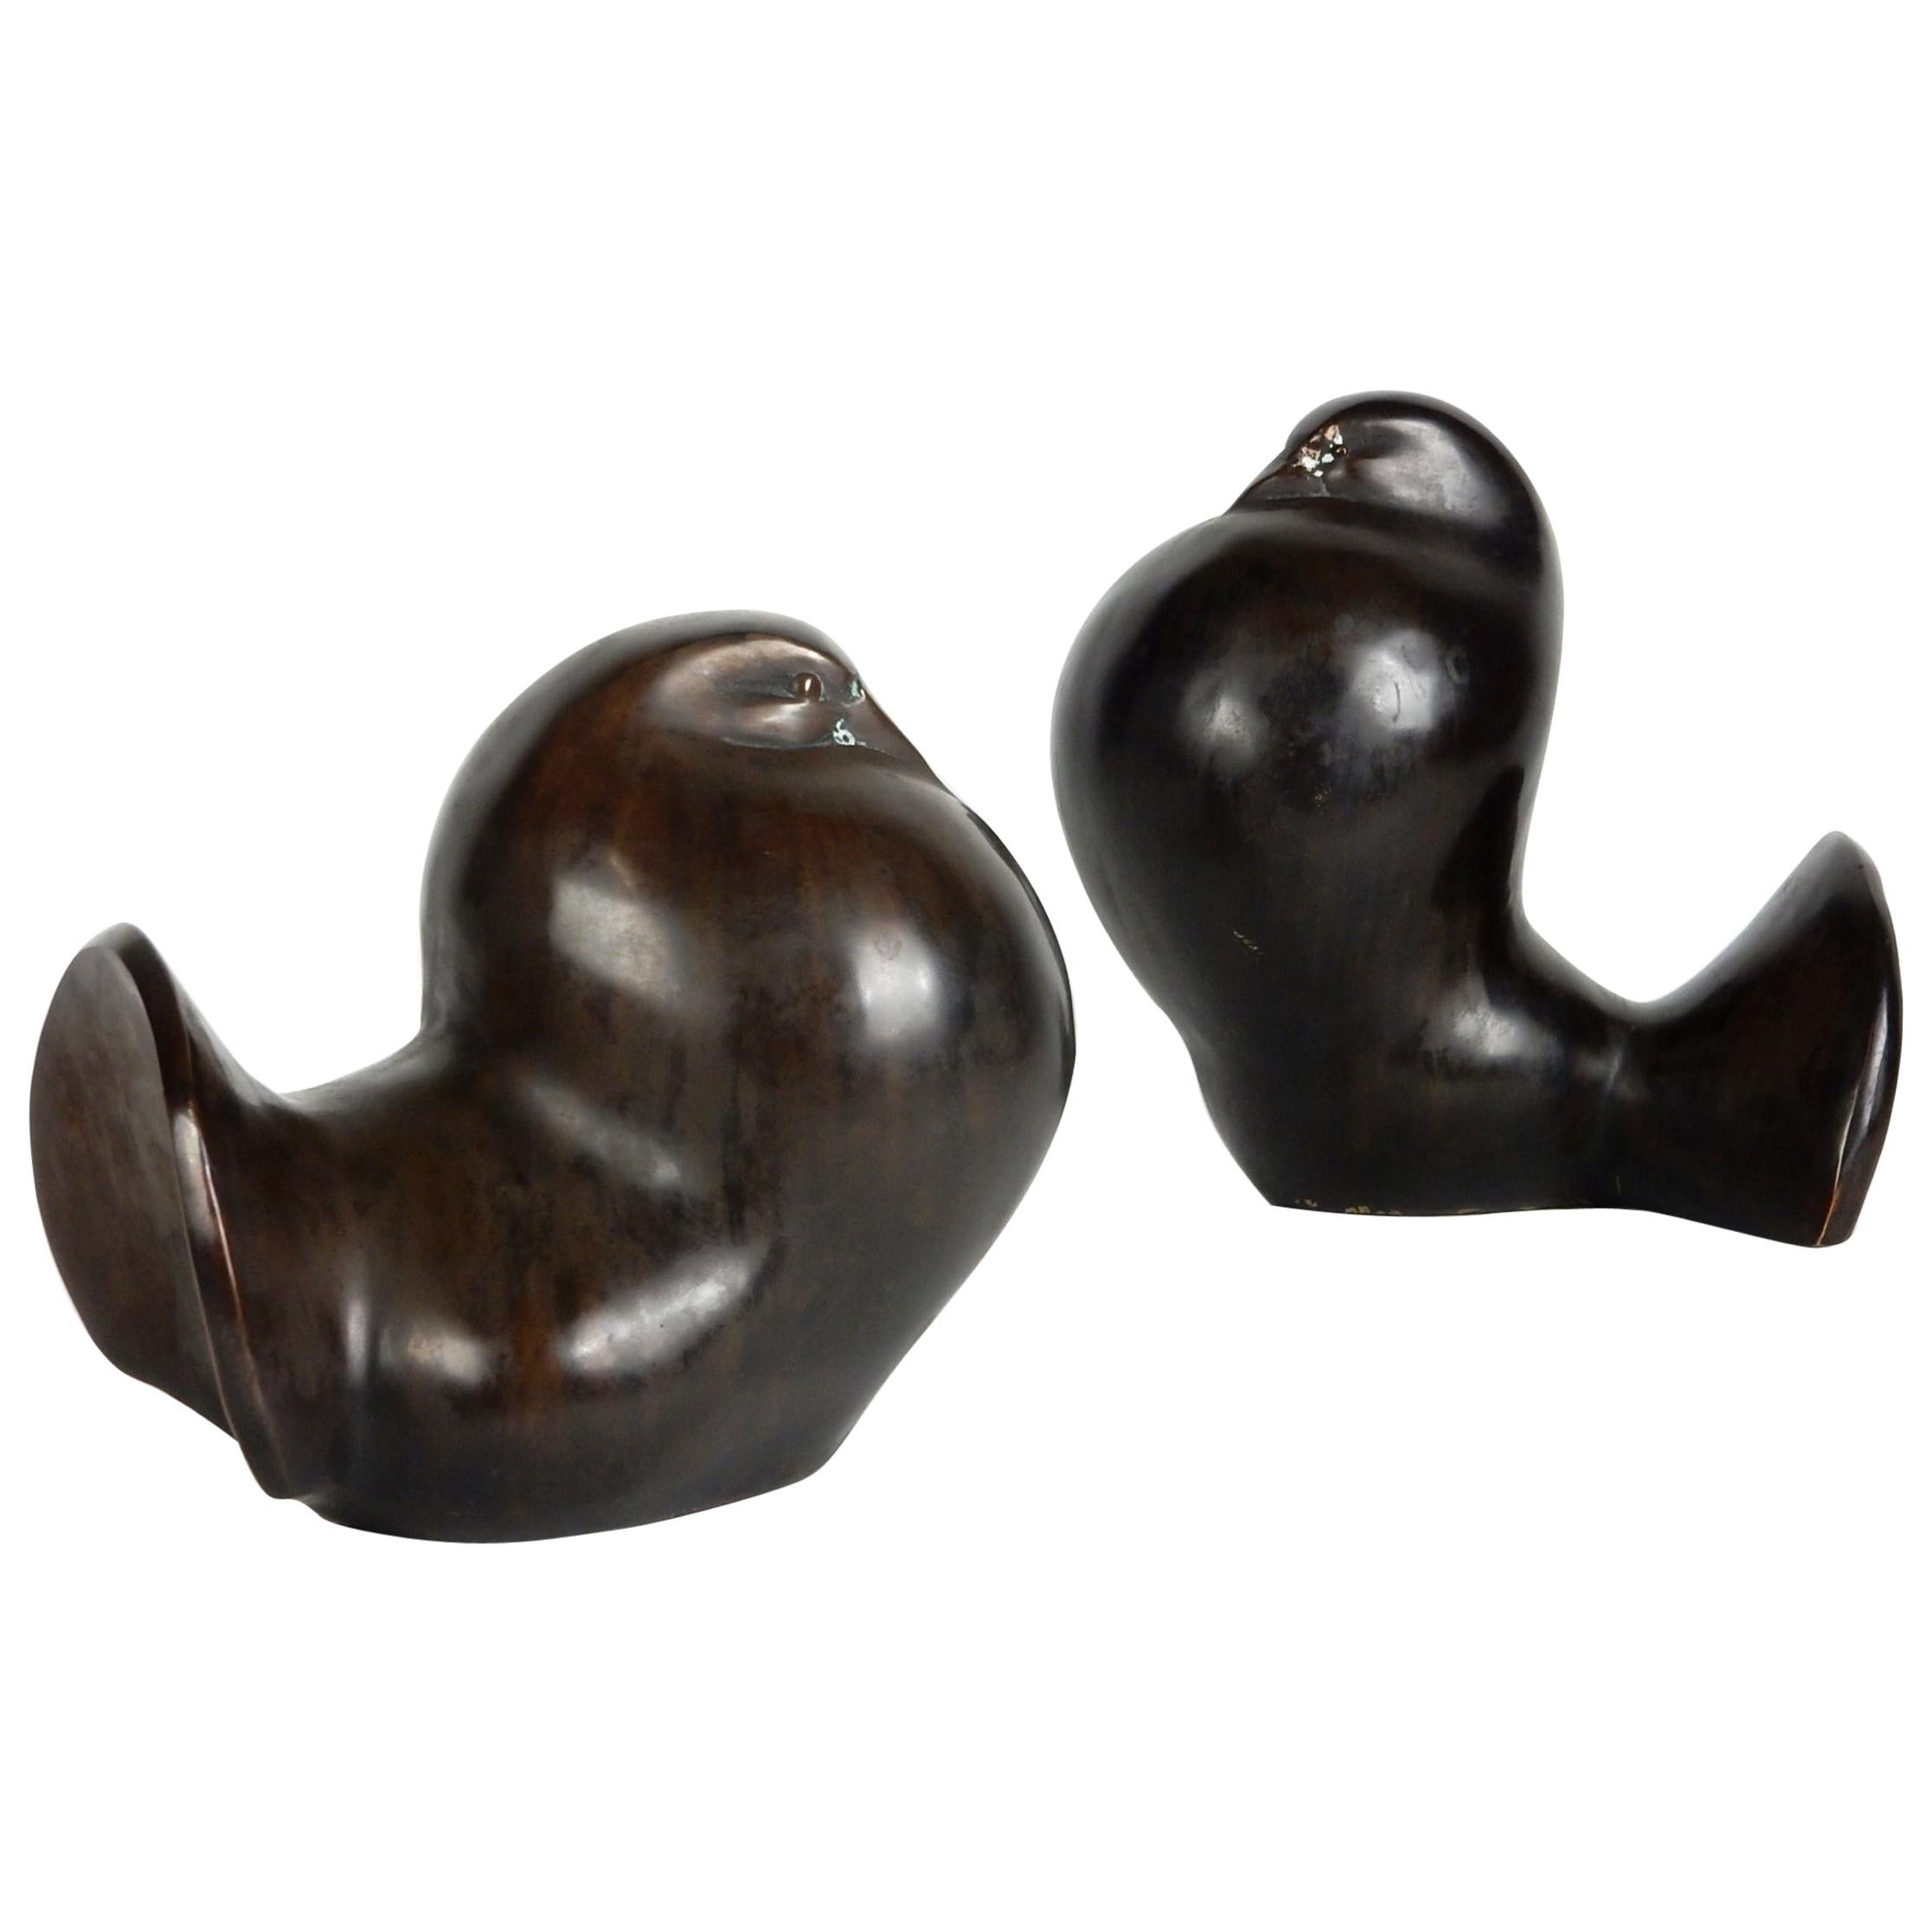 Pair of plump morning doves in the style of Barbara Hepworth.
Done in bronze, signed in cast on the inside of smallest (pictured)
They retain a wonderful patina.